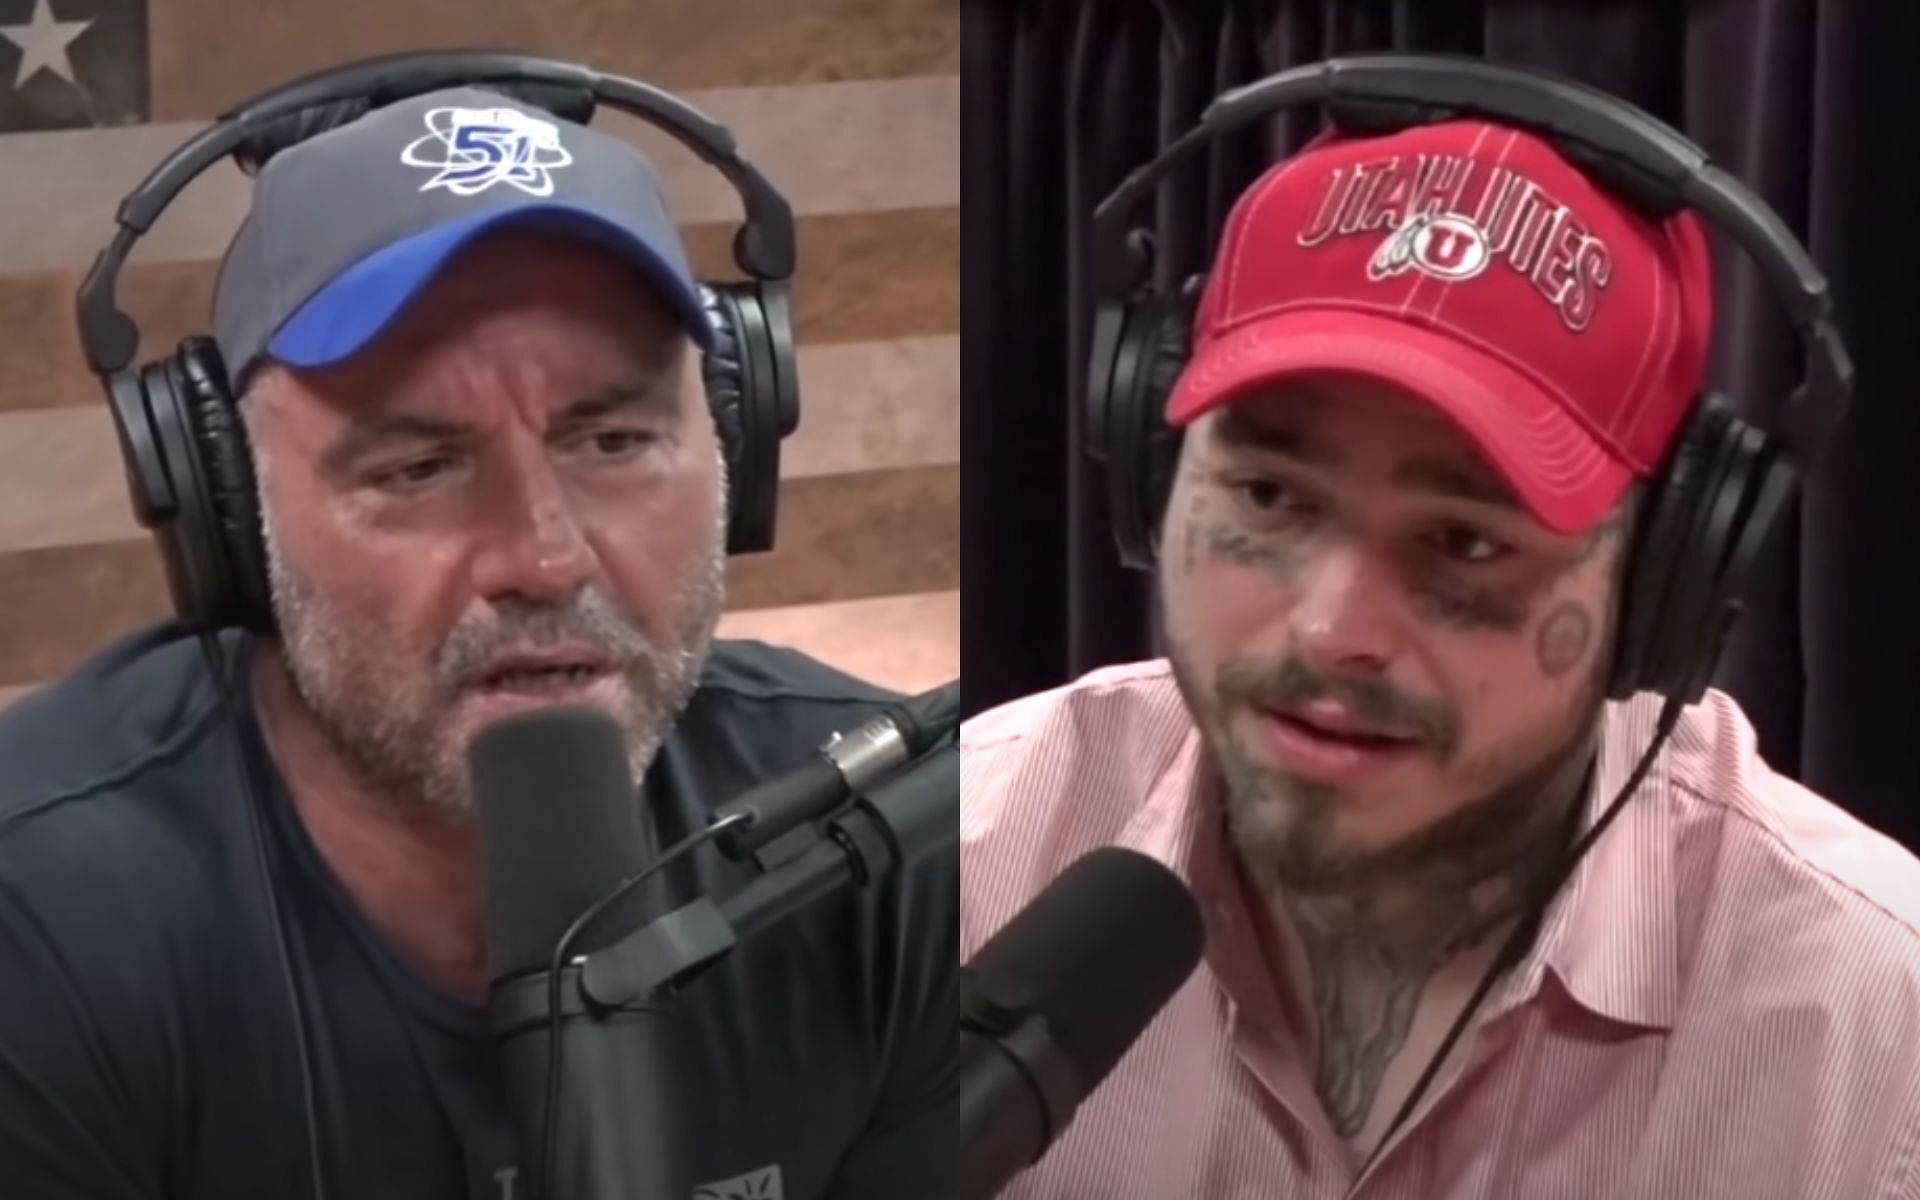 Joe Rogan (left), Post Malone (right) [Images courtesy of JRE Clips on YouTube]